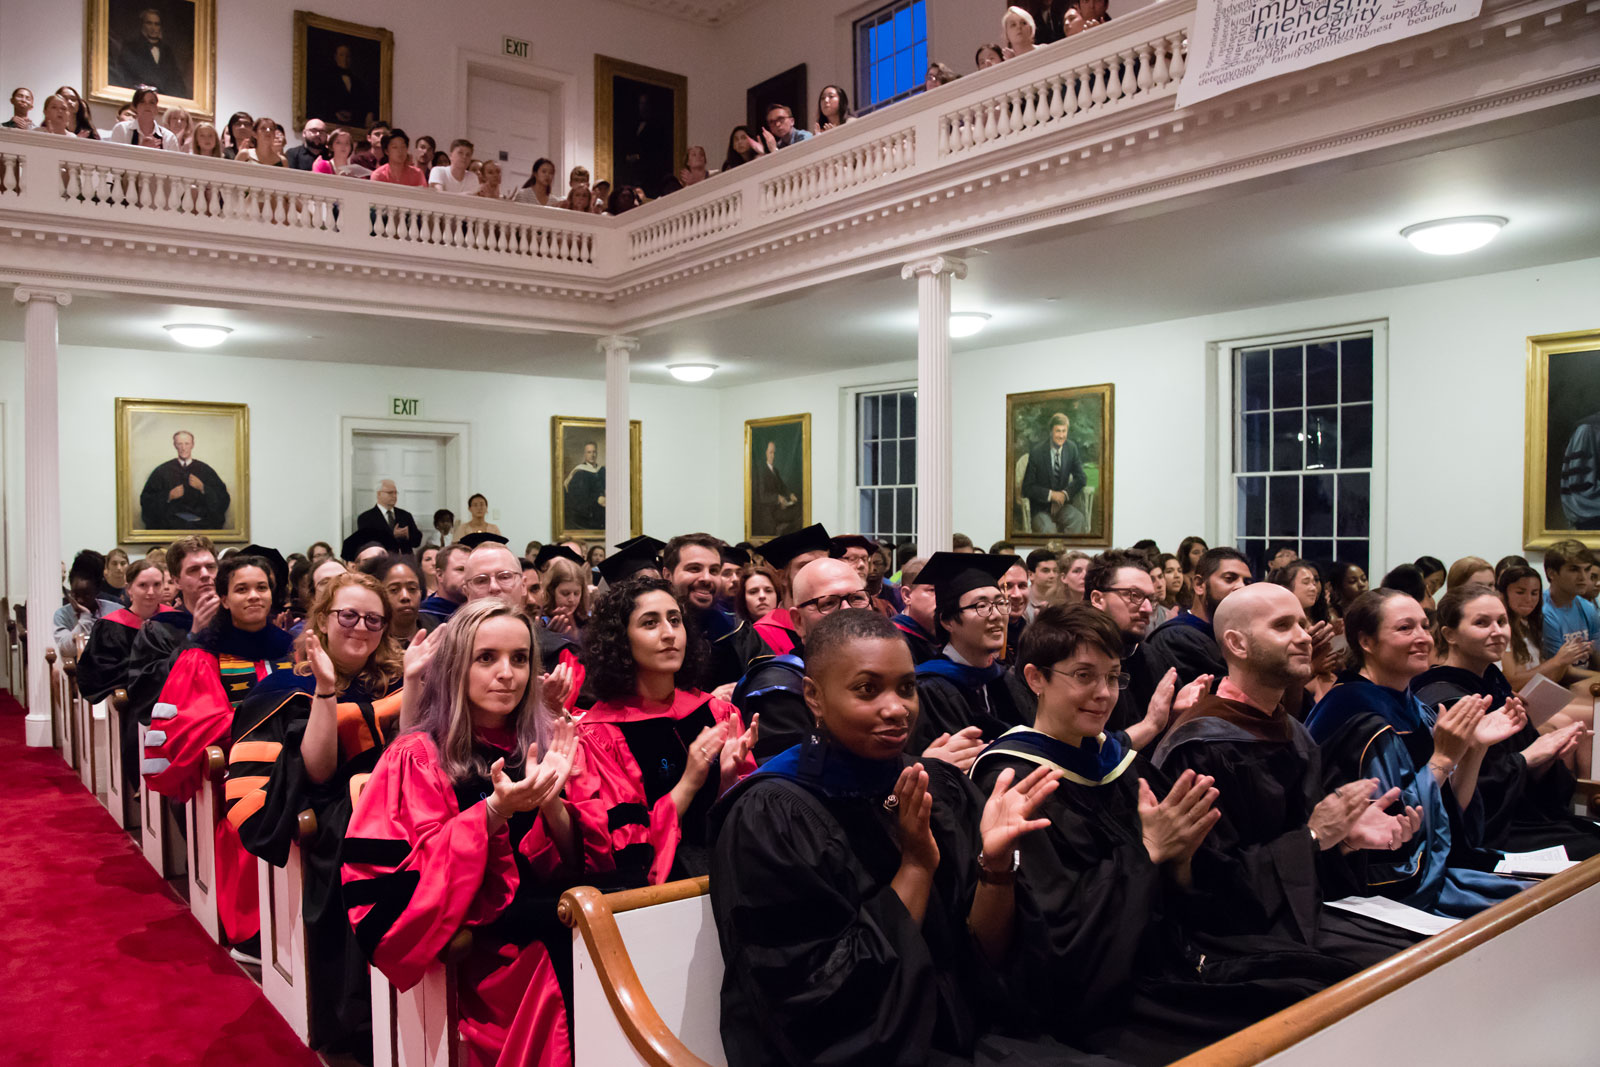 Faculty and students seated in the audience in Johnson Chapel